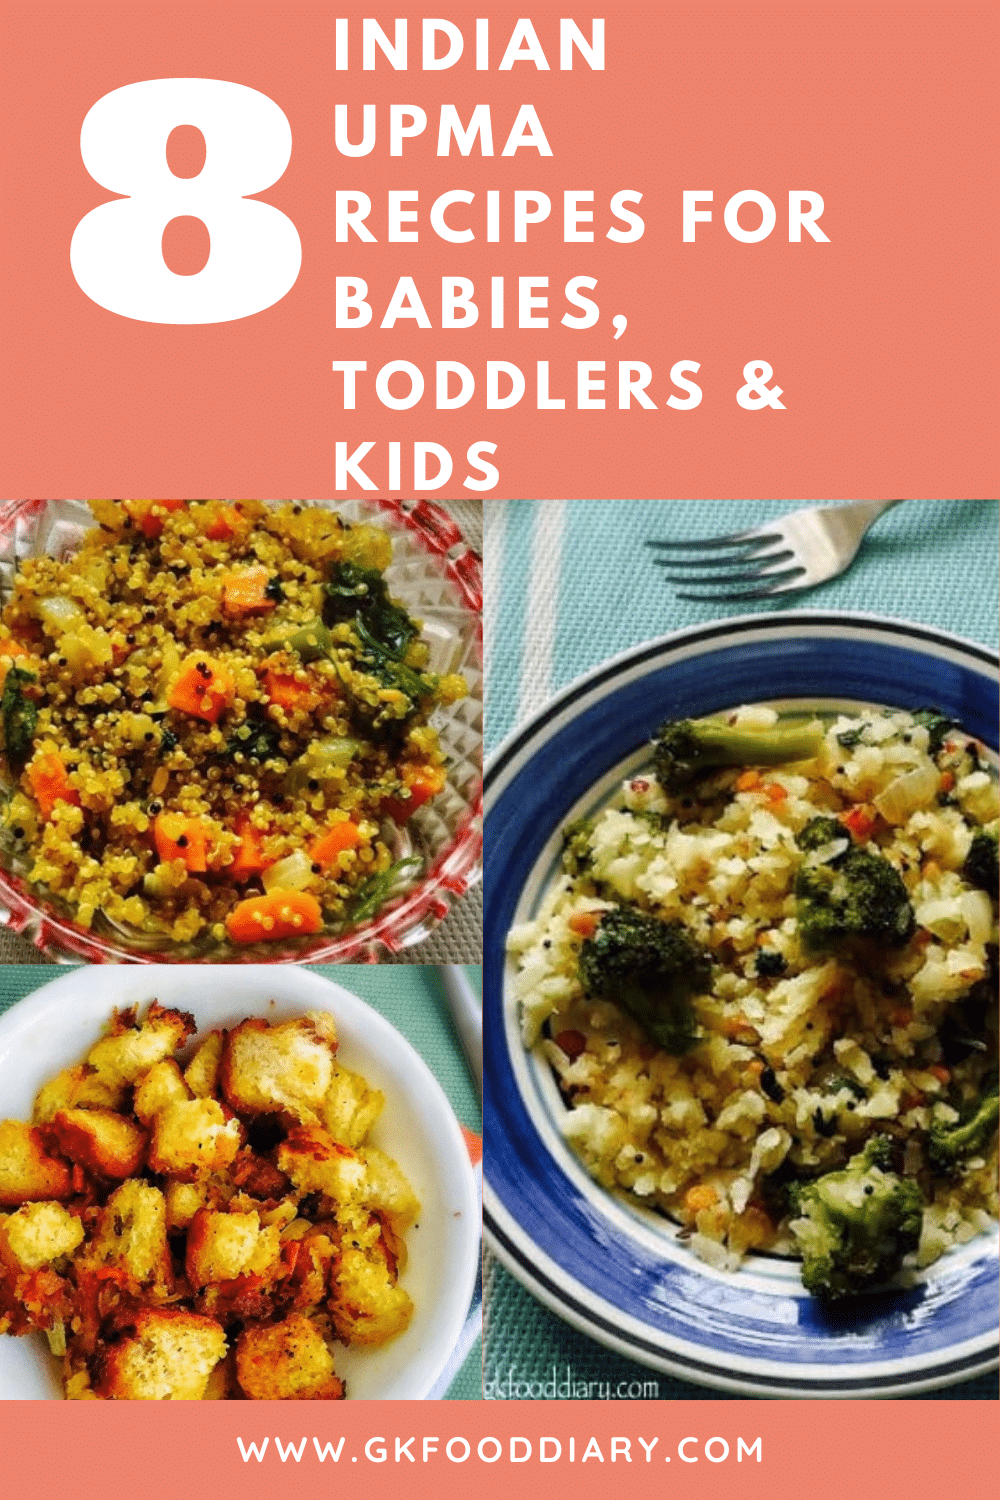 8 INDIAN Upma Recipes FOR Babies,
TODDLERS & KIDS
